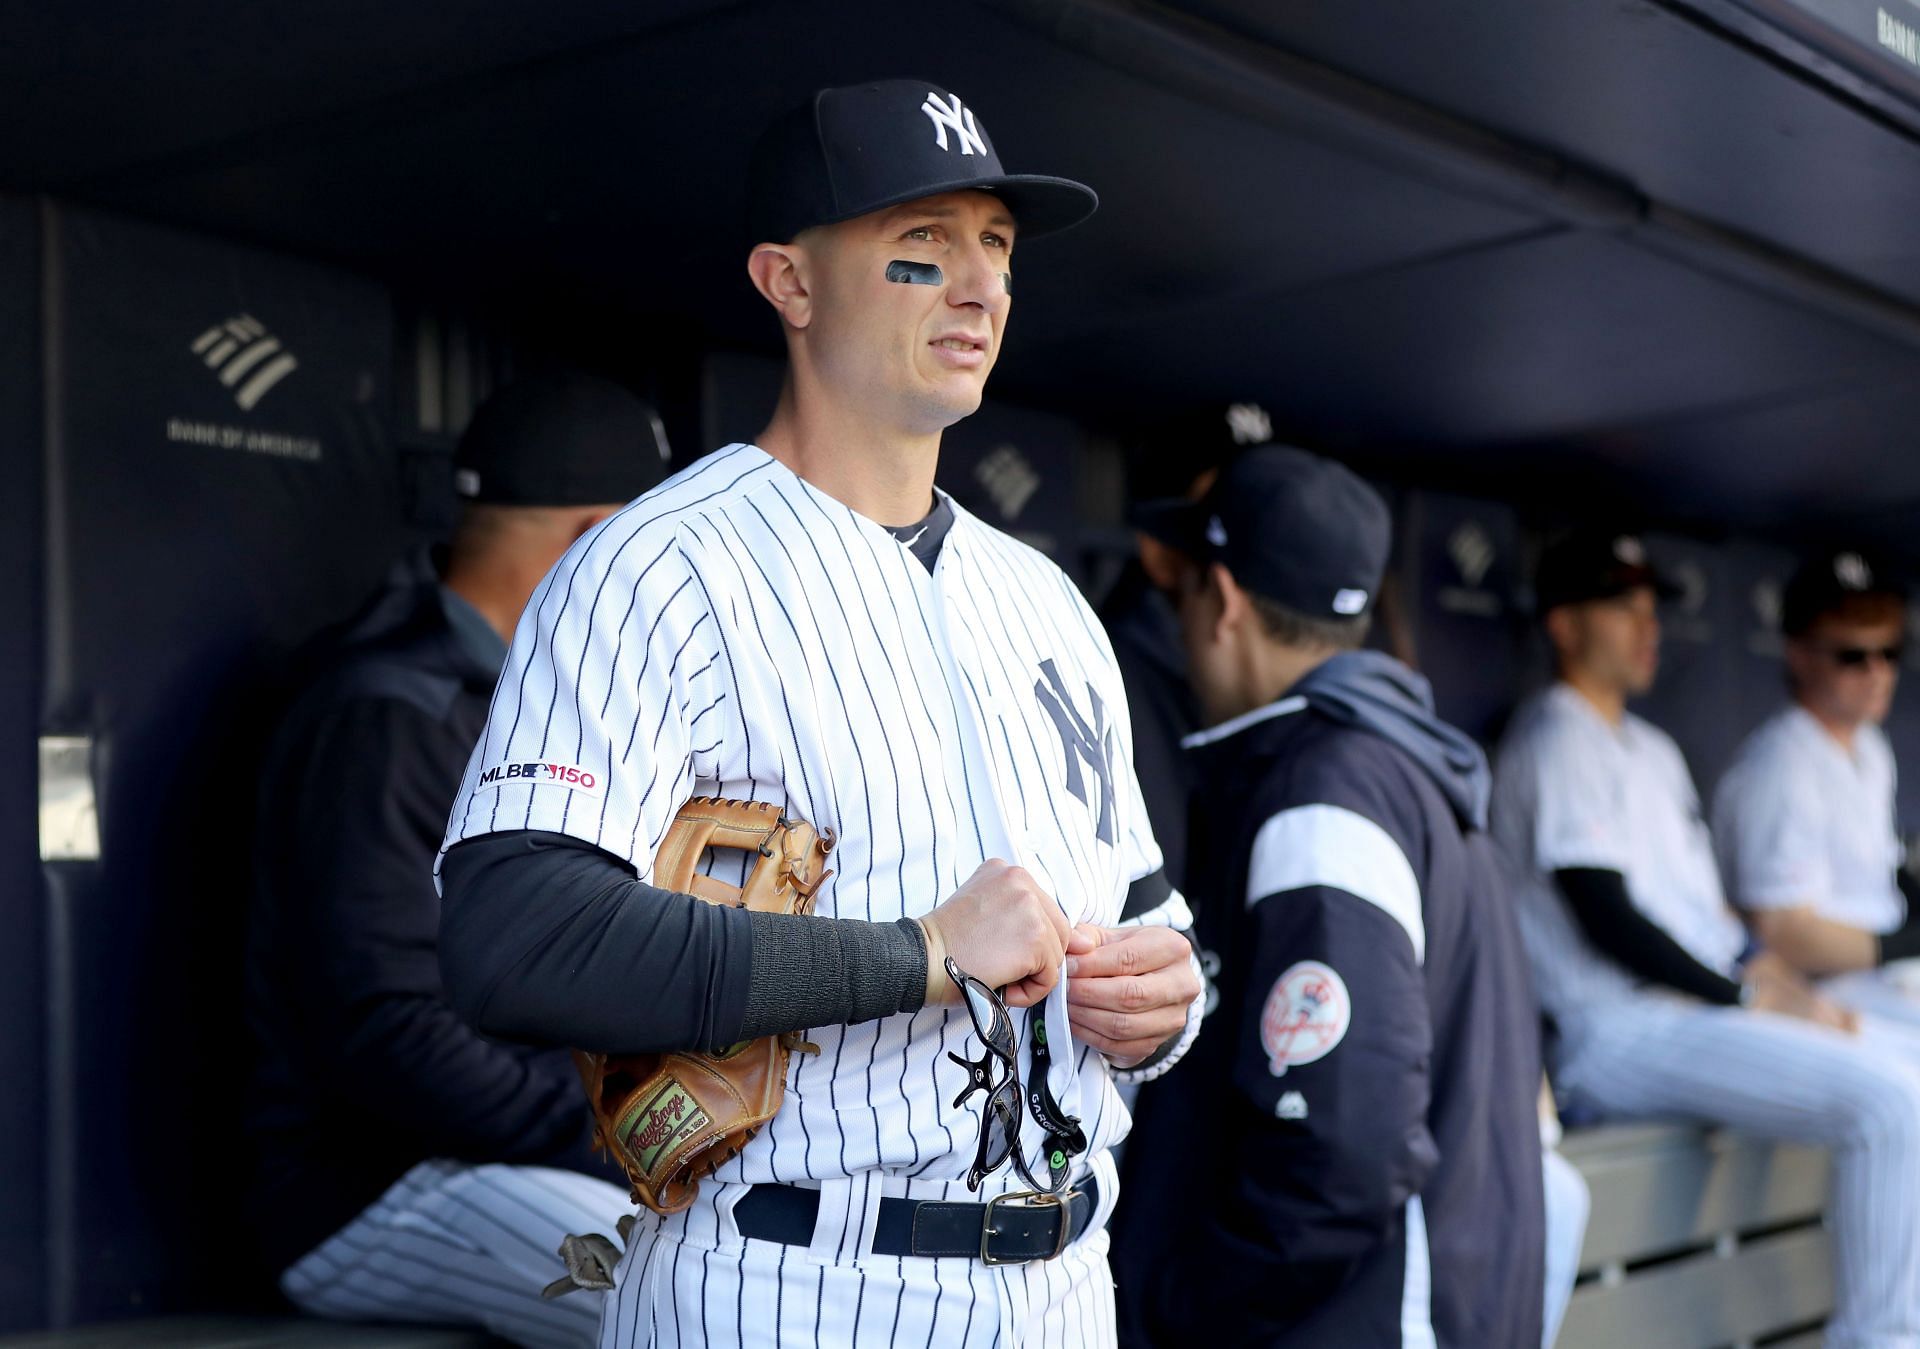 Troy Tulowitzki was unable to return to the MLB following an injury